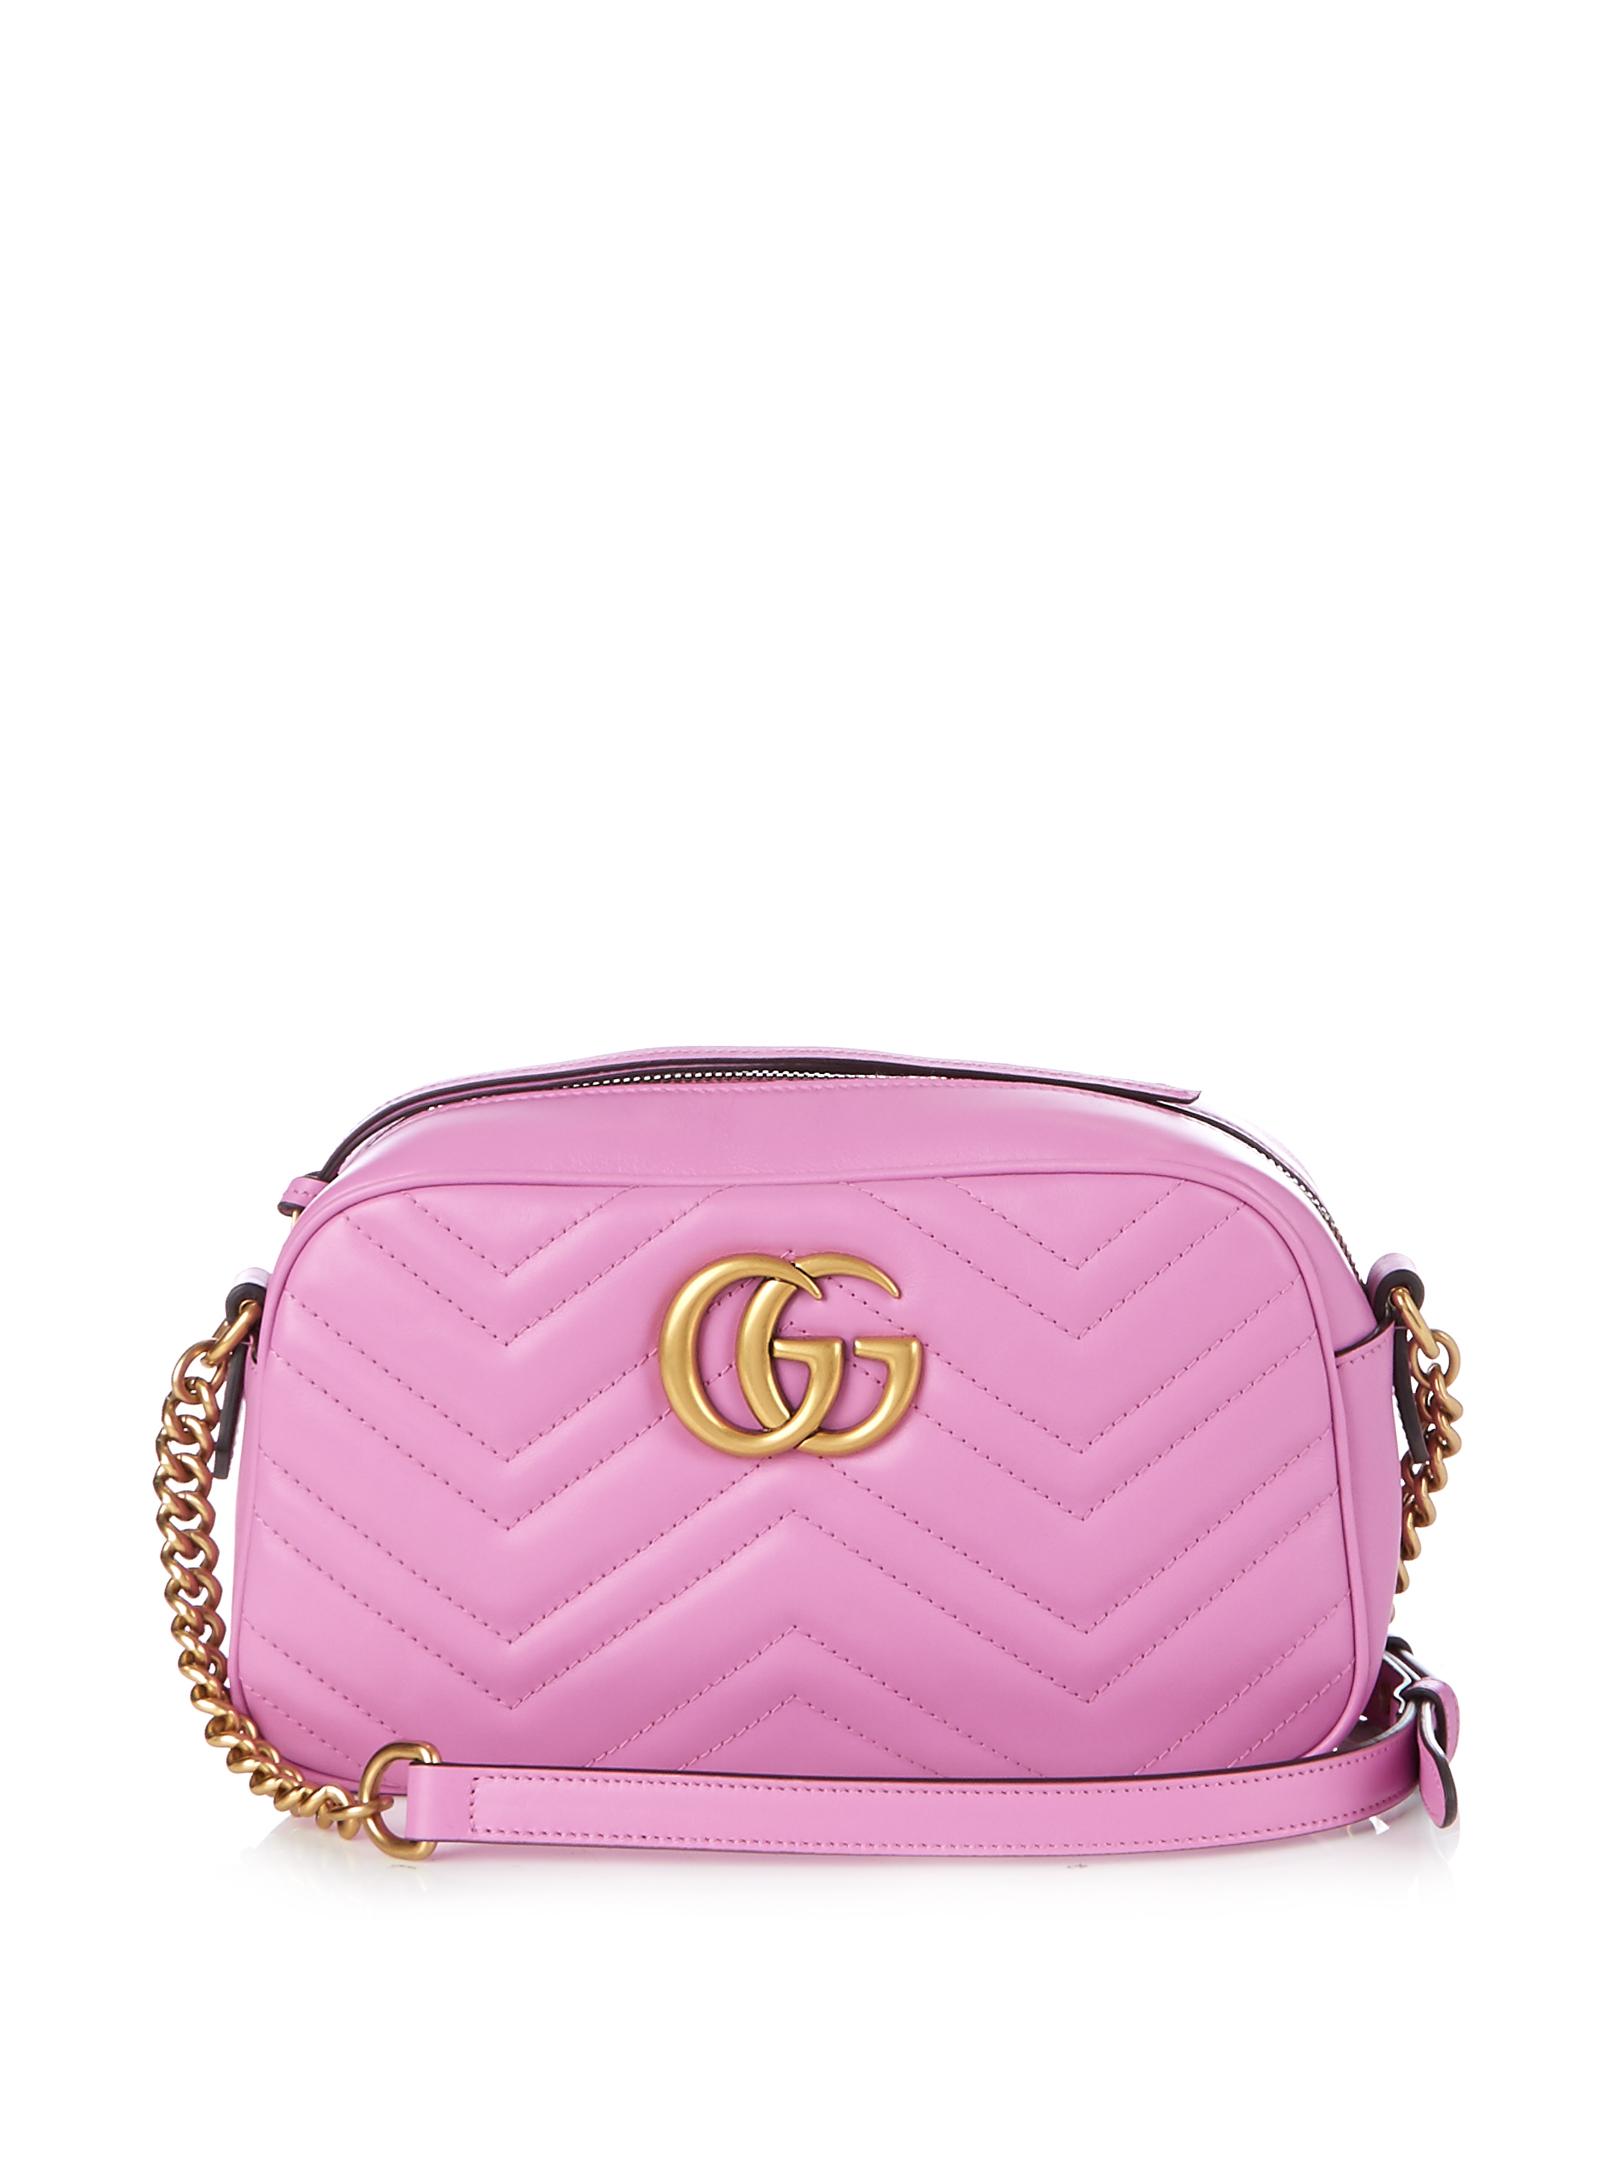 Gucci Gg Marmont Small Quilted-leather Cross-body Bag in Pink - Lyst